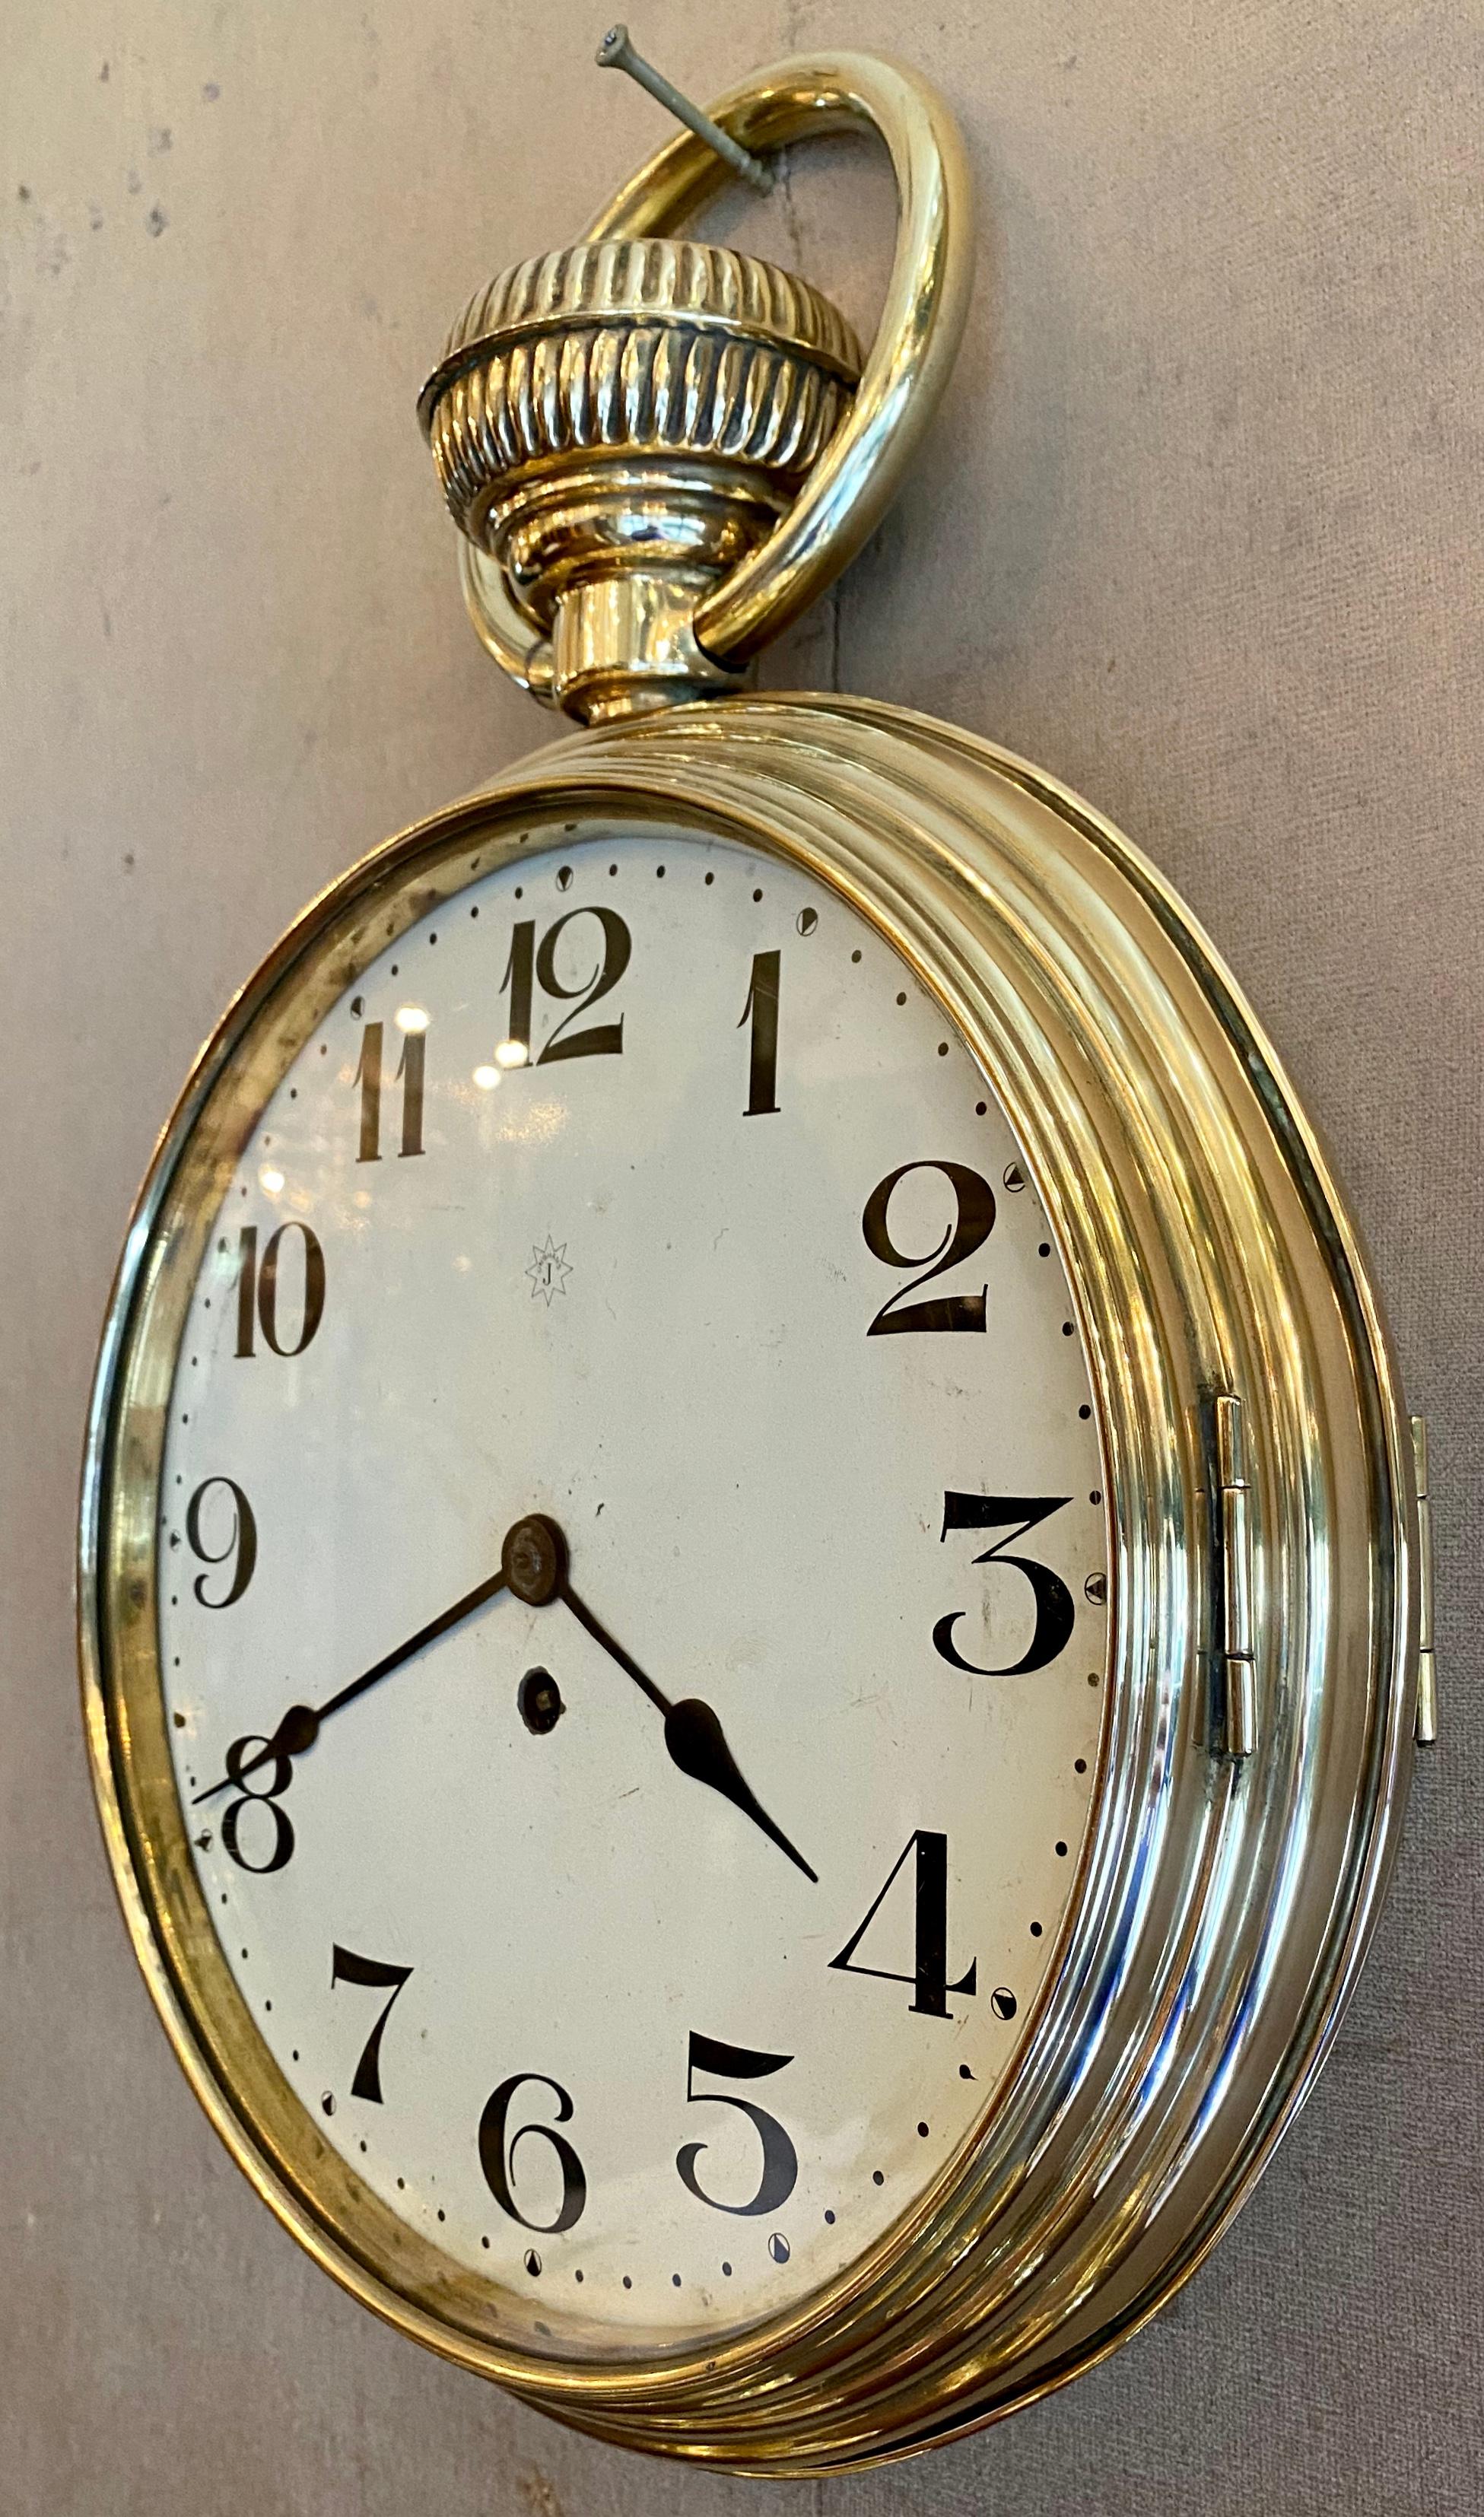 Antique brass wall clock in running order, pocket watch style, circa 1890-1900.
ECL044.